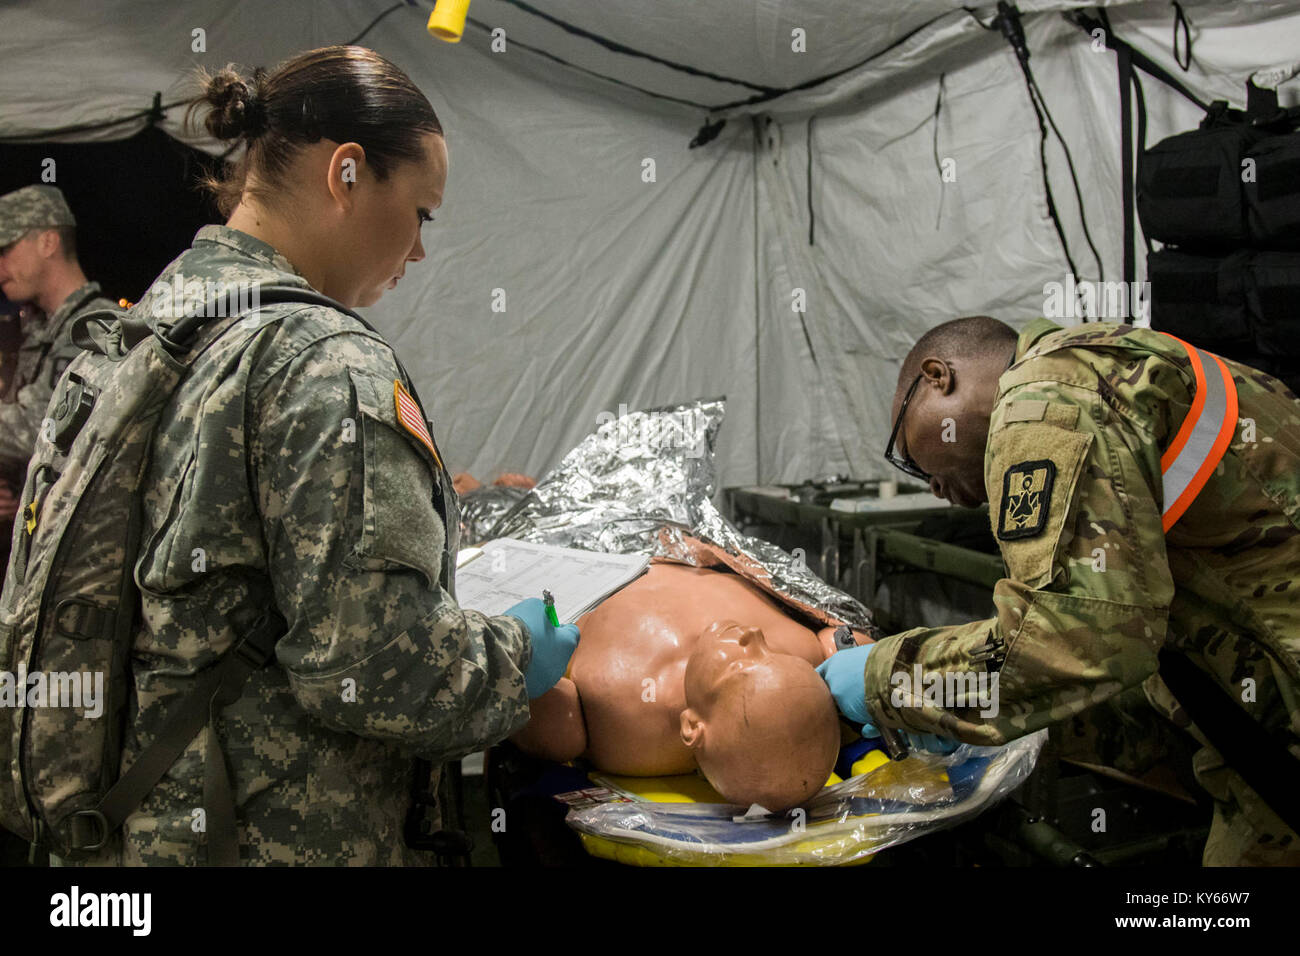 U.S. Army Soldier exanime simulated casualties during a Mass Casualty Decontamination exercise at the Homestead-Miami Speedway, in Miami-Dade, Florida, Jan. 9, 2018. This is the 3rd in a series of joint training exercises between Active Duty, Guard, and Reserve Army units and local municipalities across the United States. This JTE focused on the decontamination and transportation of casualties in a simulated mass chemical attack. (DoD Stock Photo